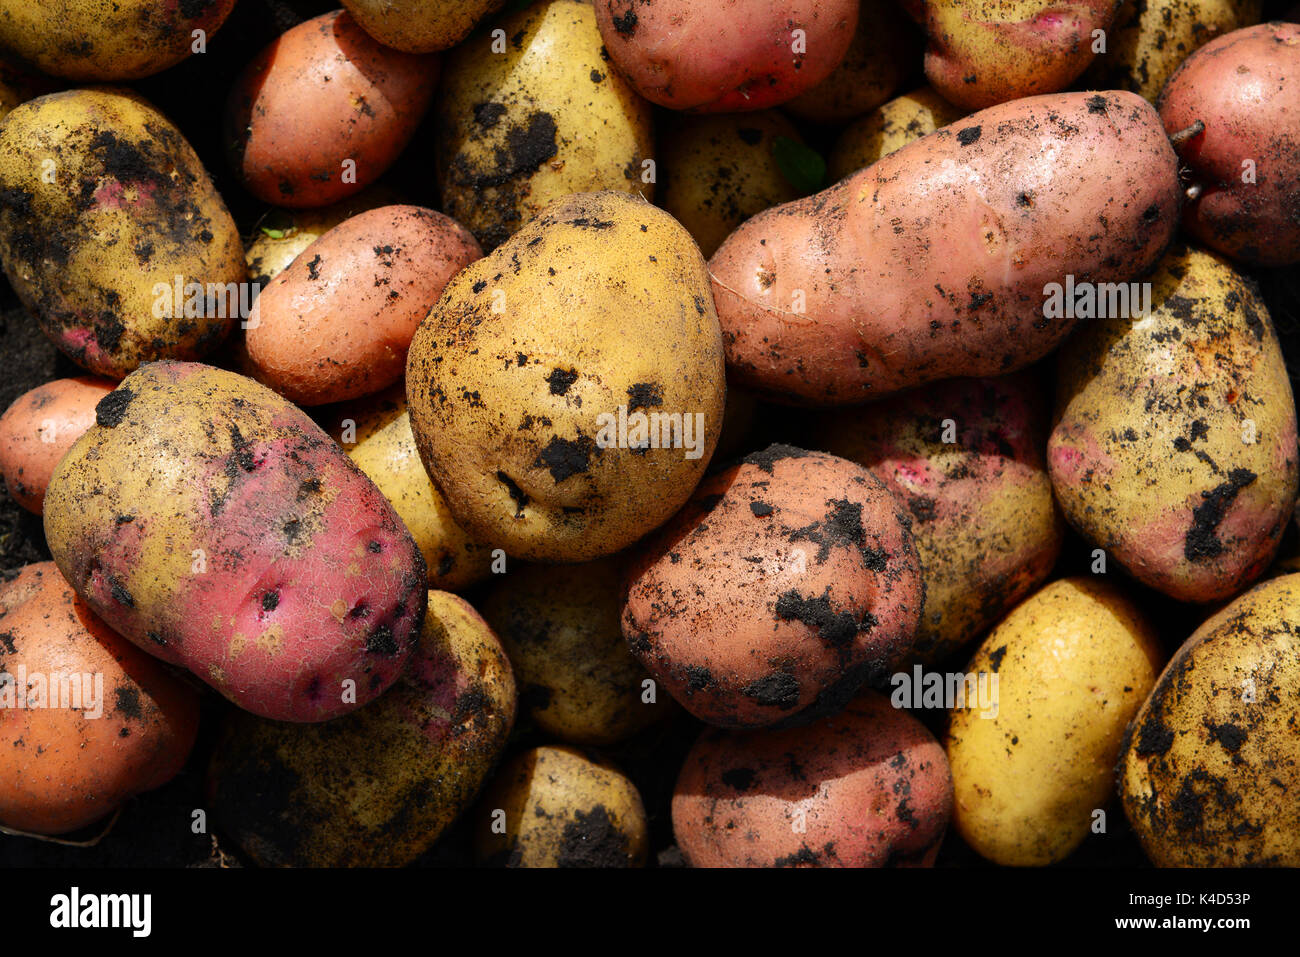 Background of potatoes of different varieties Stock Photo